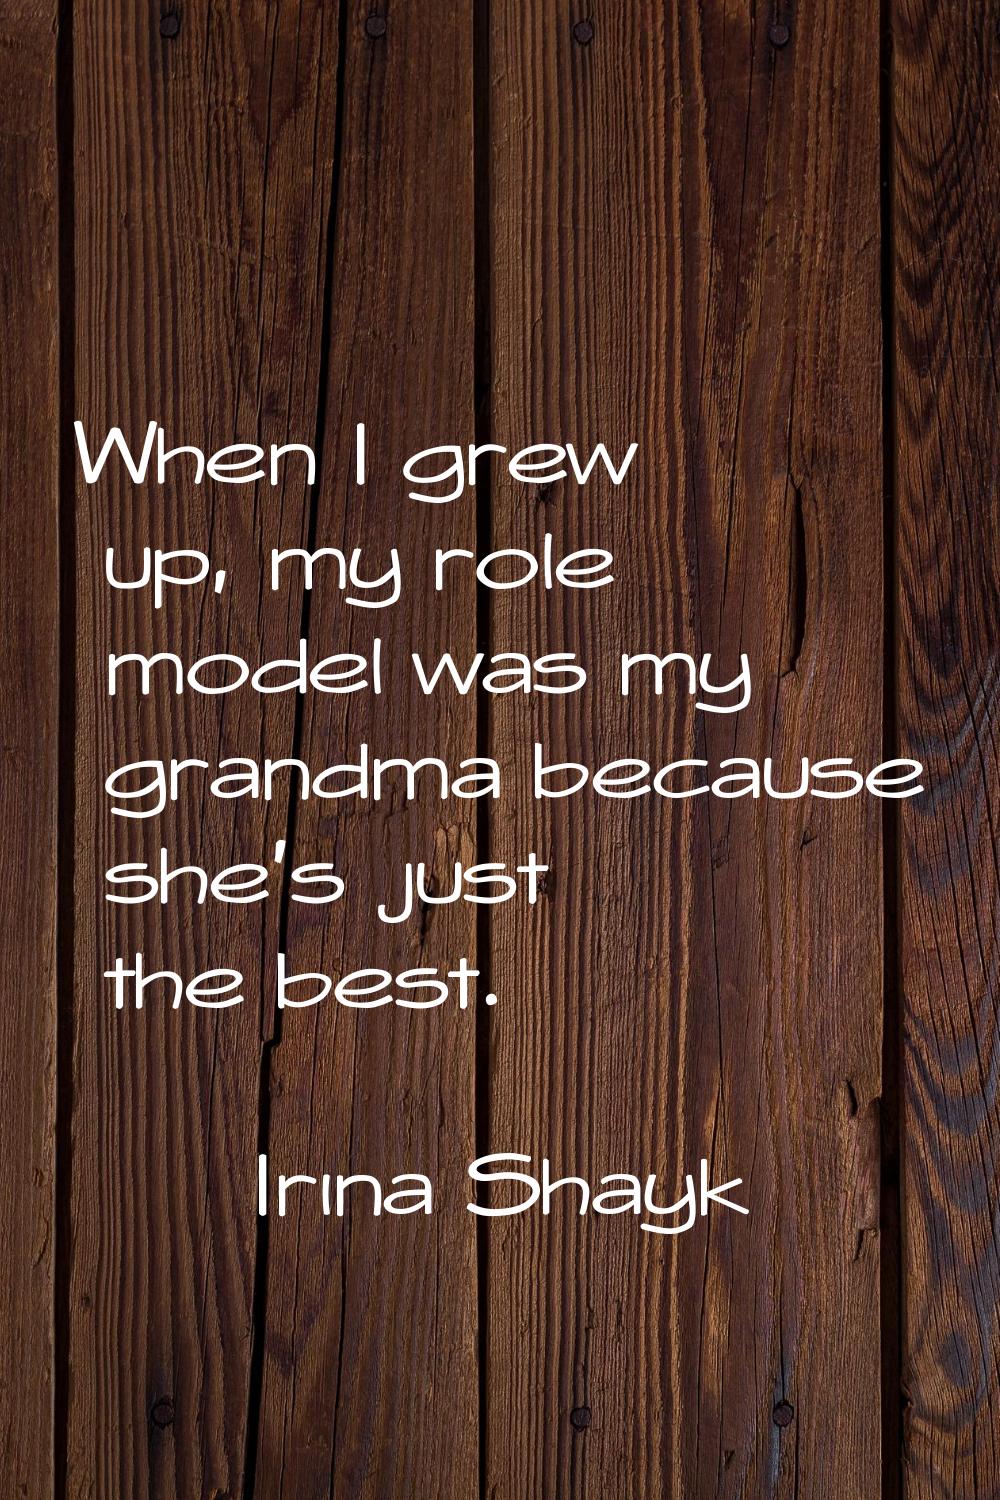 When I grew up, my role model was my grandma because she's just the best.